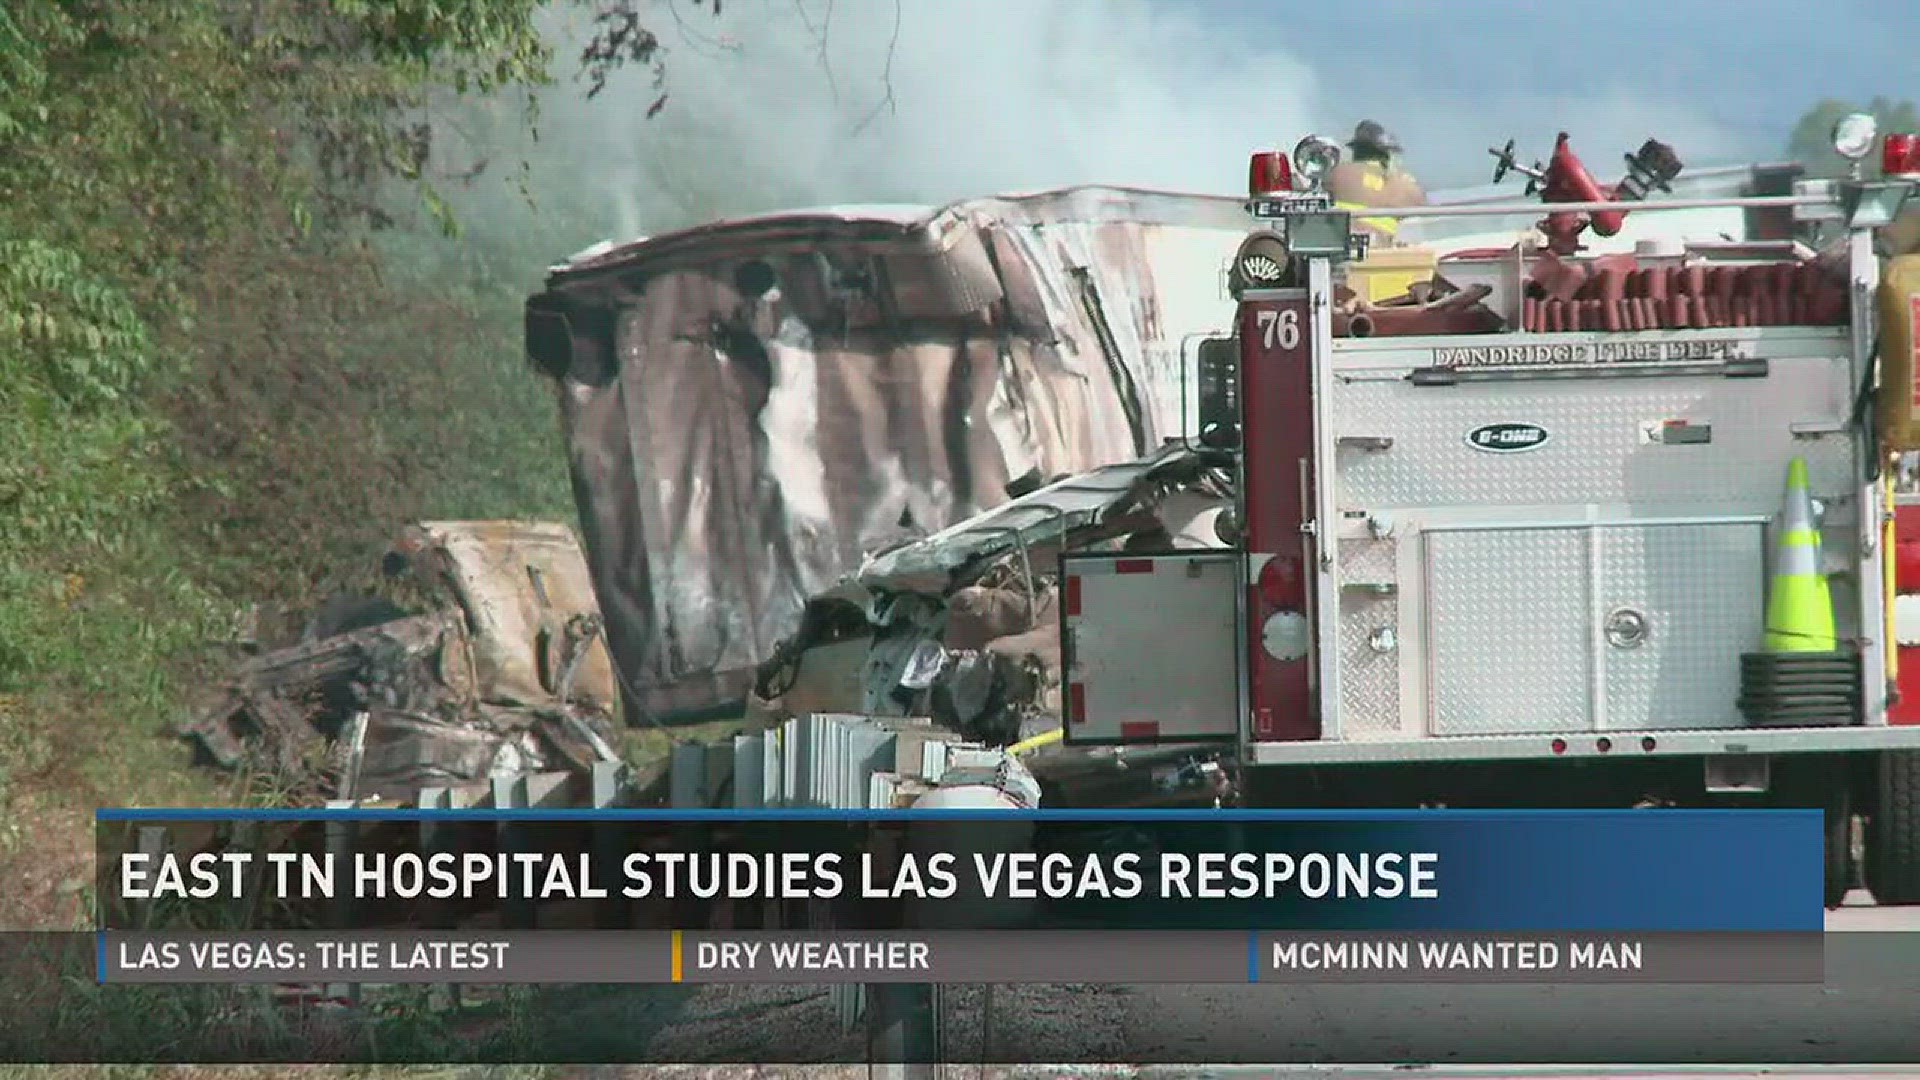 Oct. 2, 2017: Medical professionals are studying the response to the mass shooting in Las Vegas.